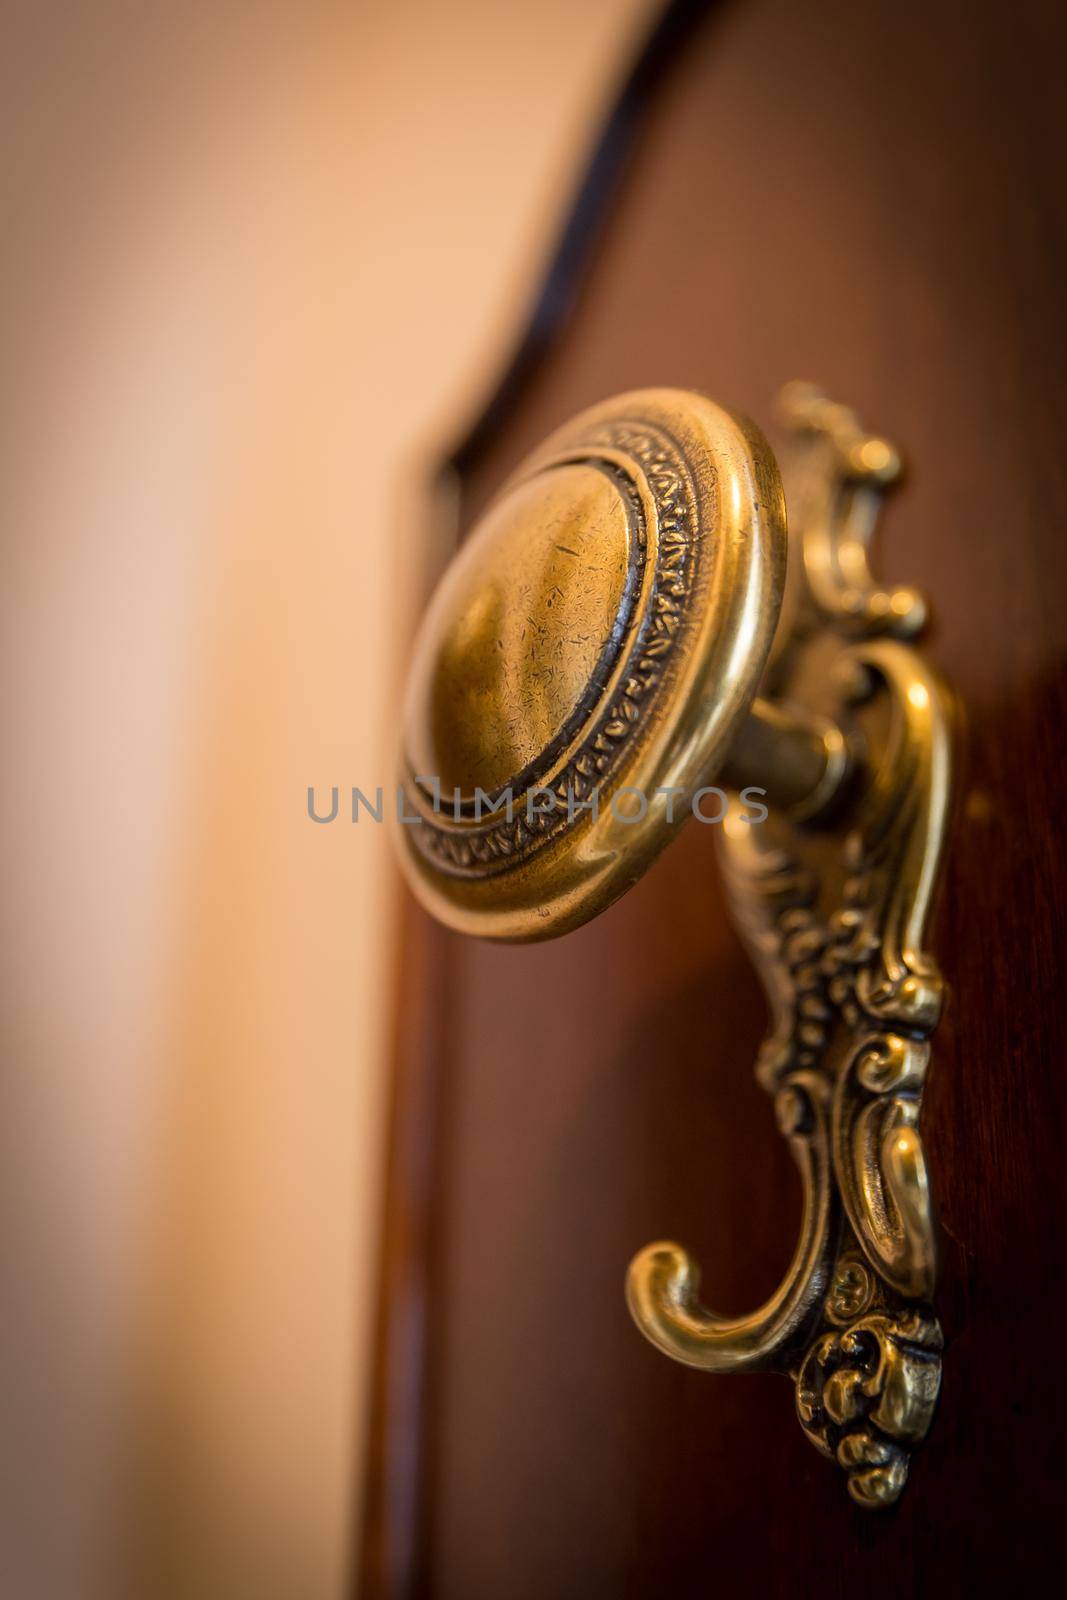 Old-fashioned golden coat hook in a lobby